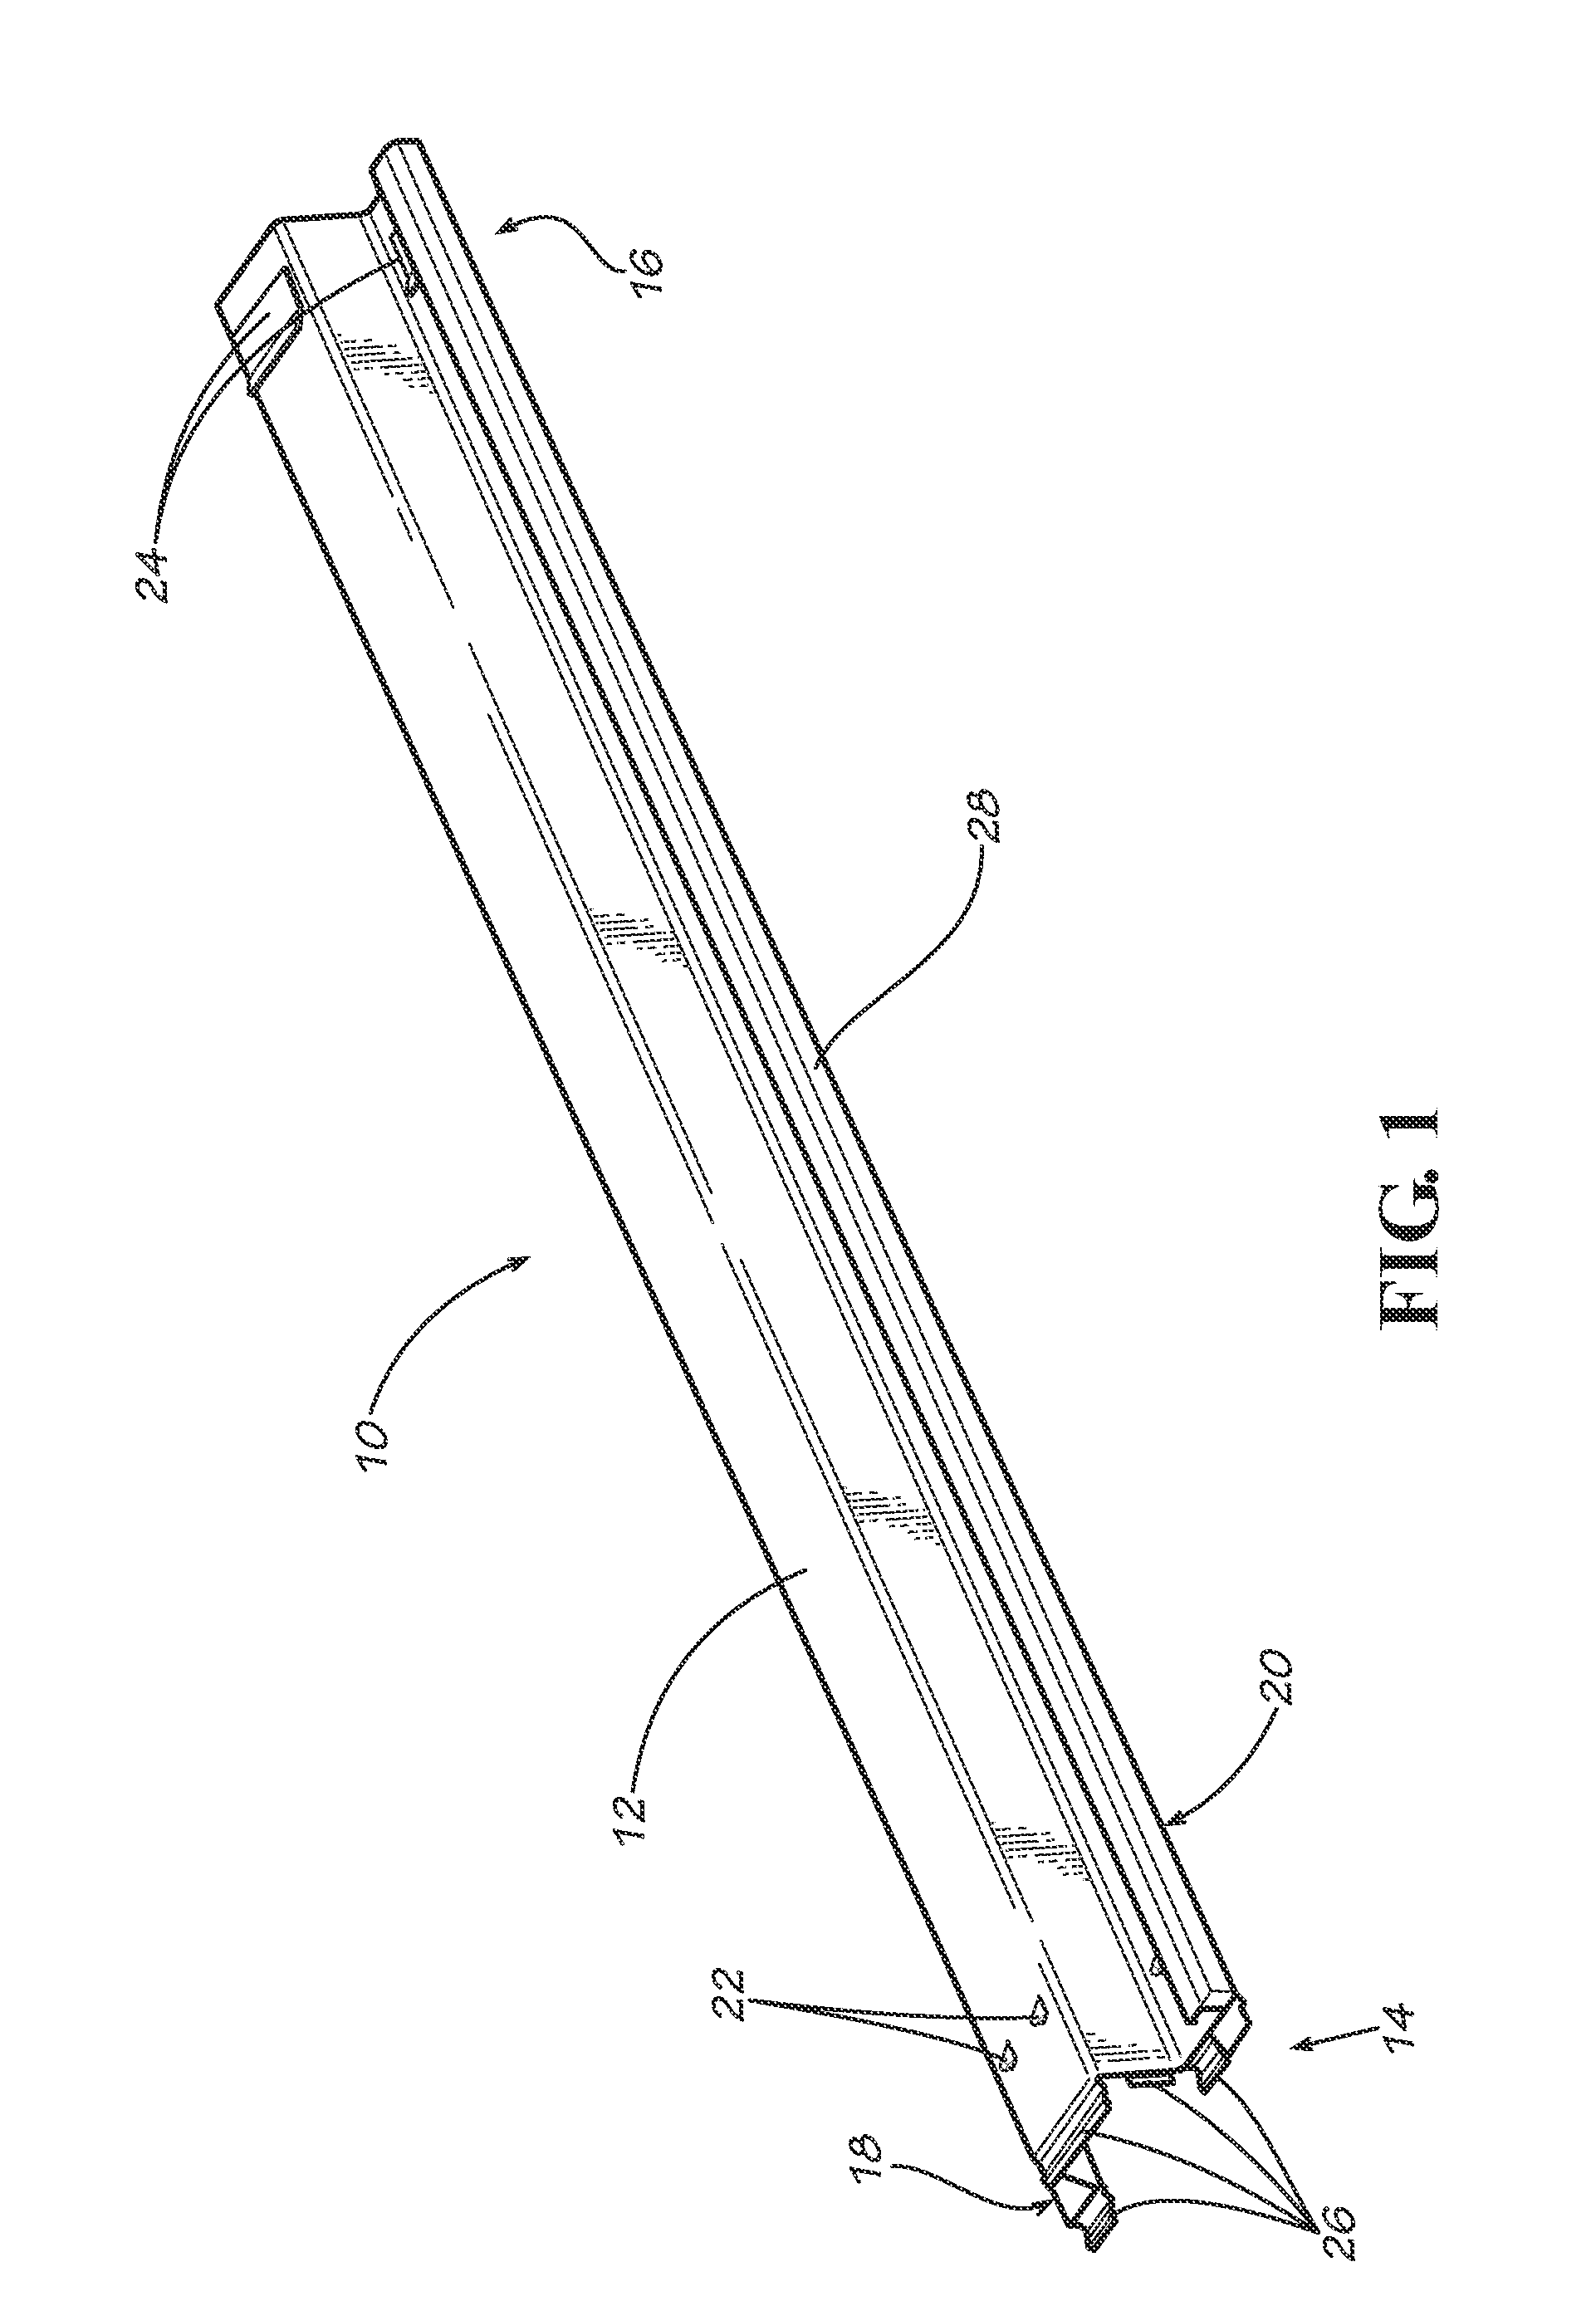 System and method for installing sheet piles